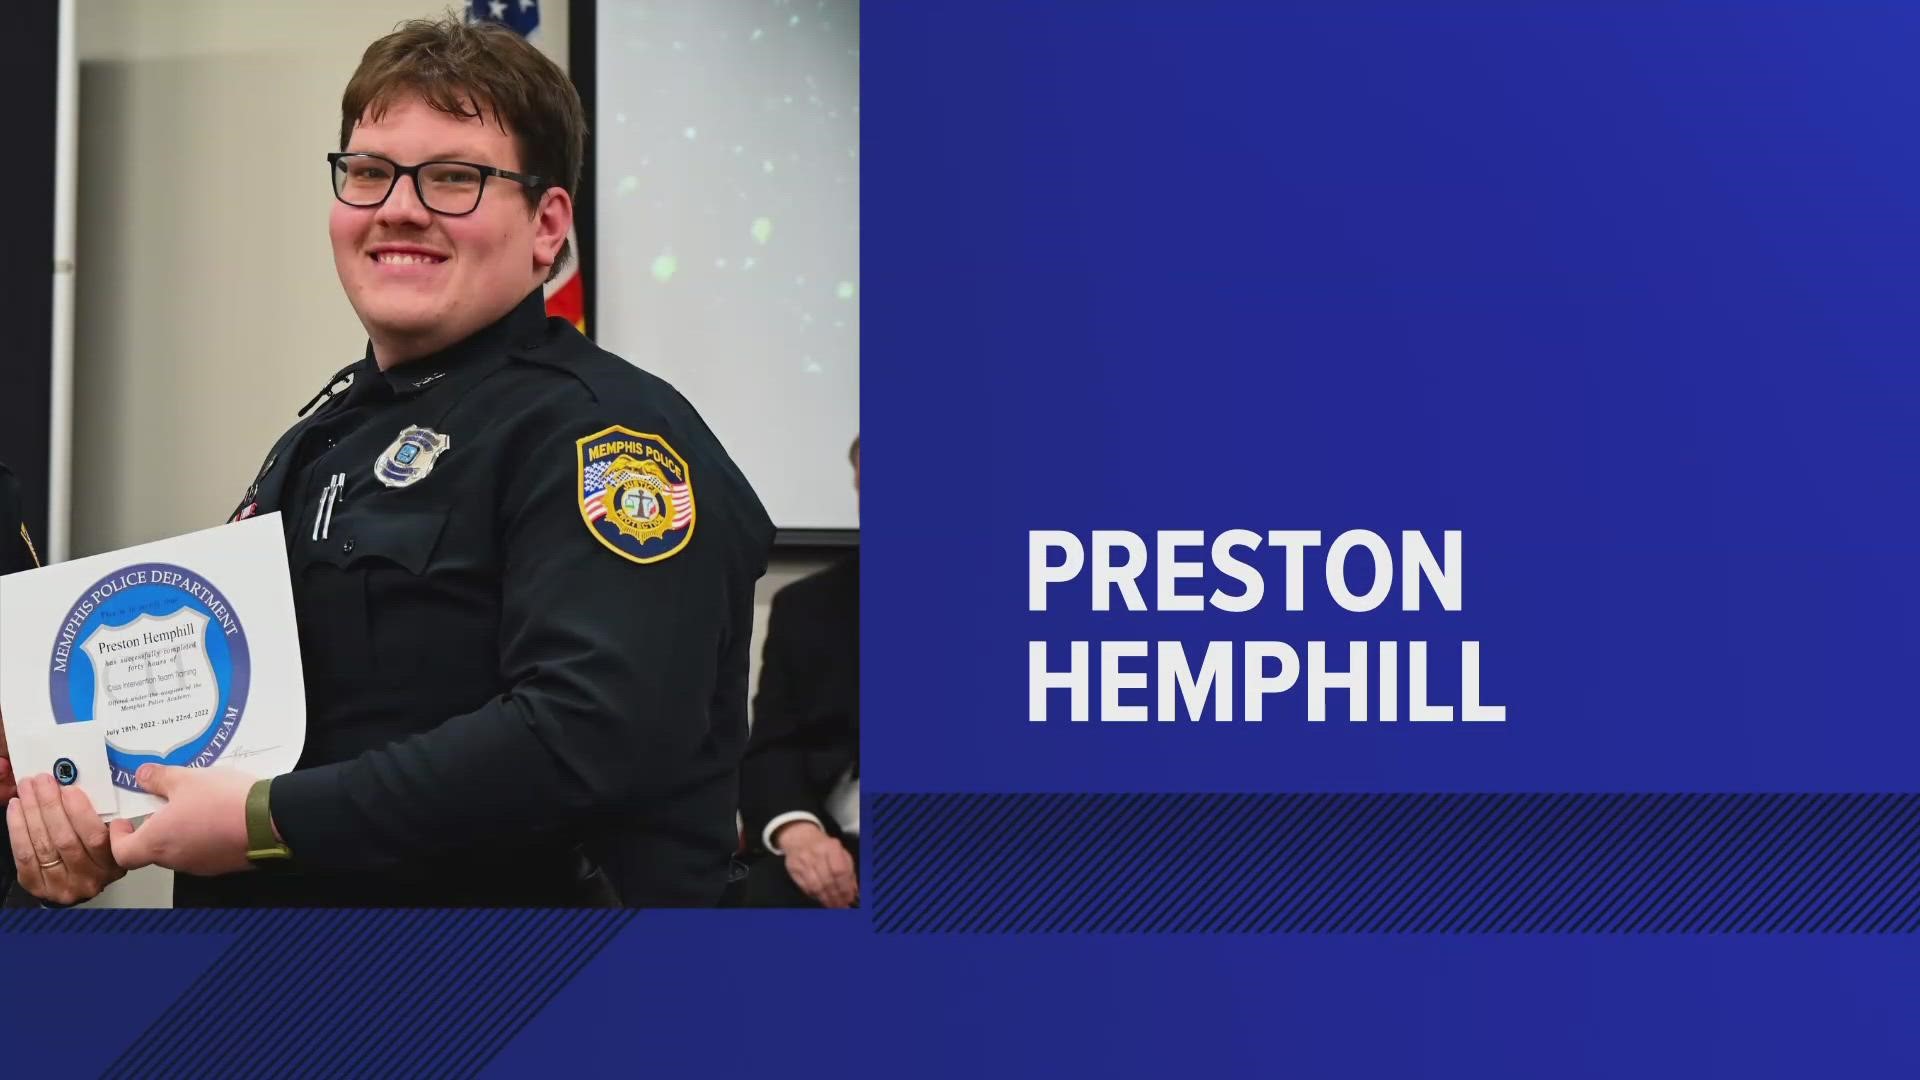 Preston Hemphill was relieved of duty Jan. 8, but his suspension was not announced until Monday.